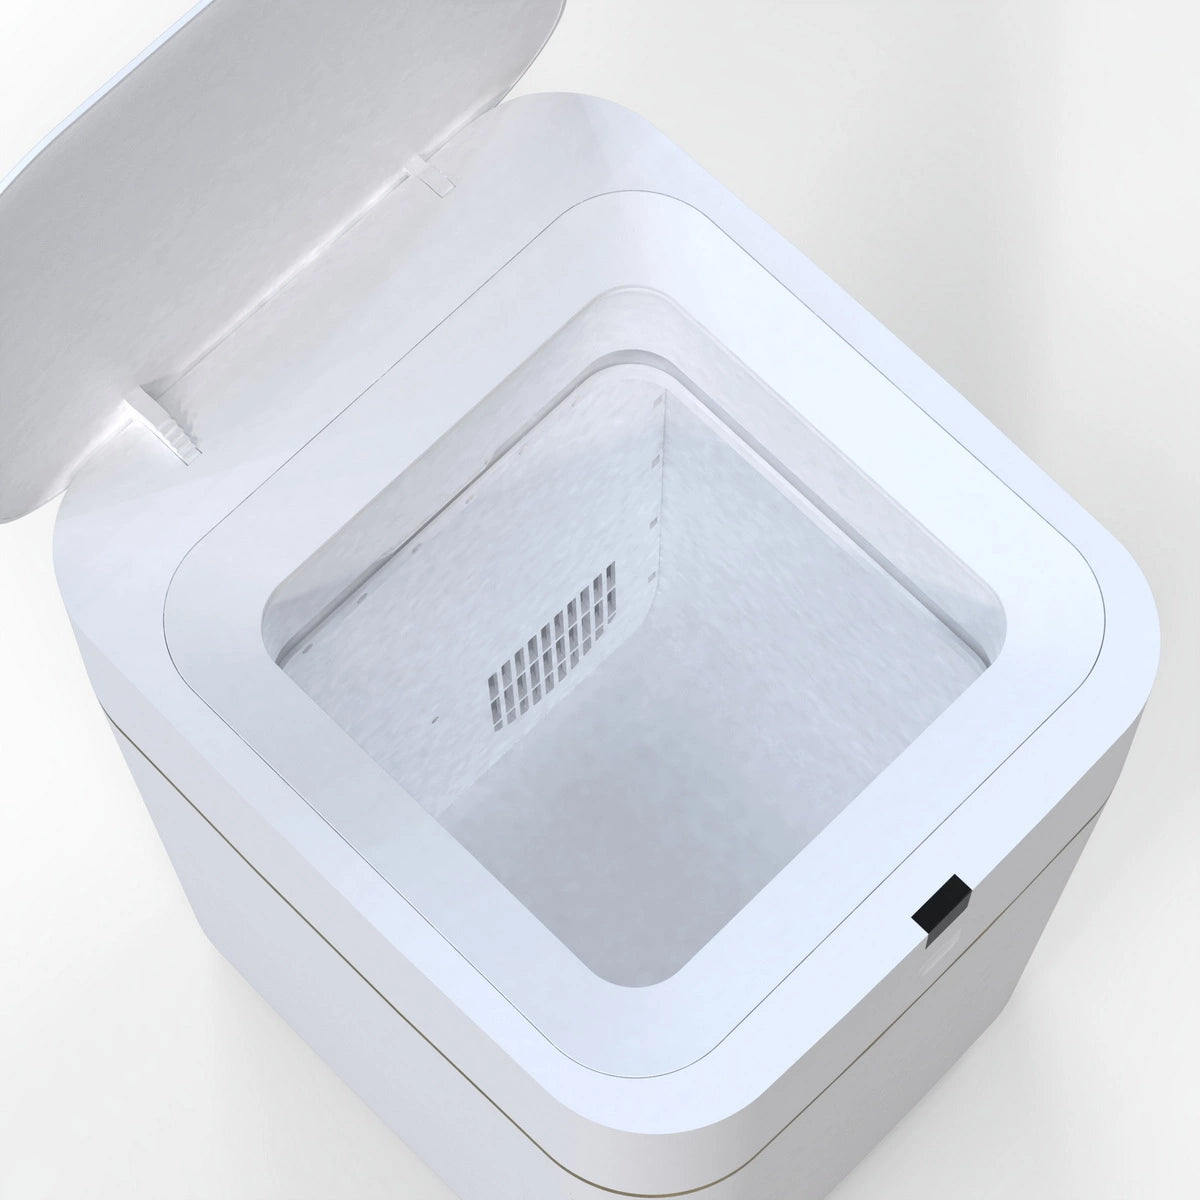 airdeer self-sealing sensor trash can/baby diaper trash can has a large opening which exceeds most smart trash cans on the market